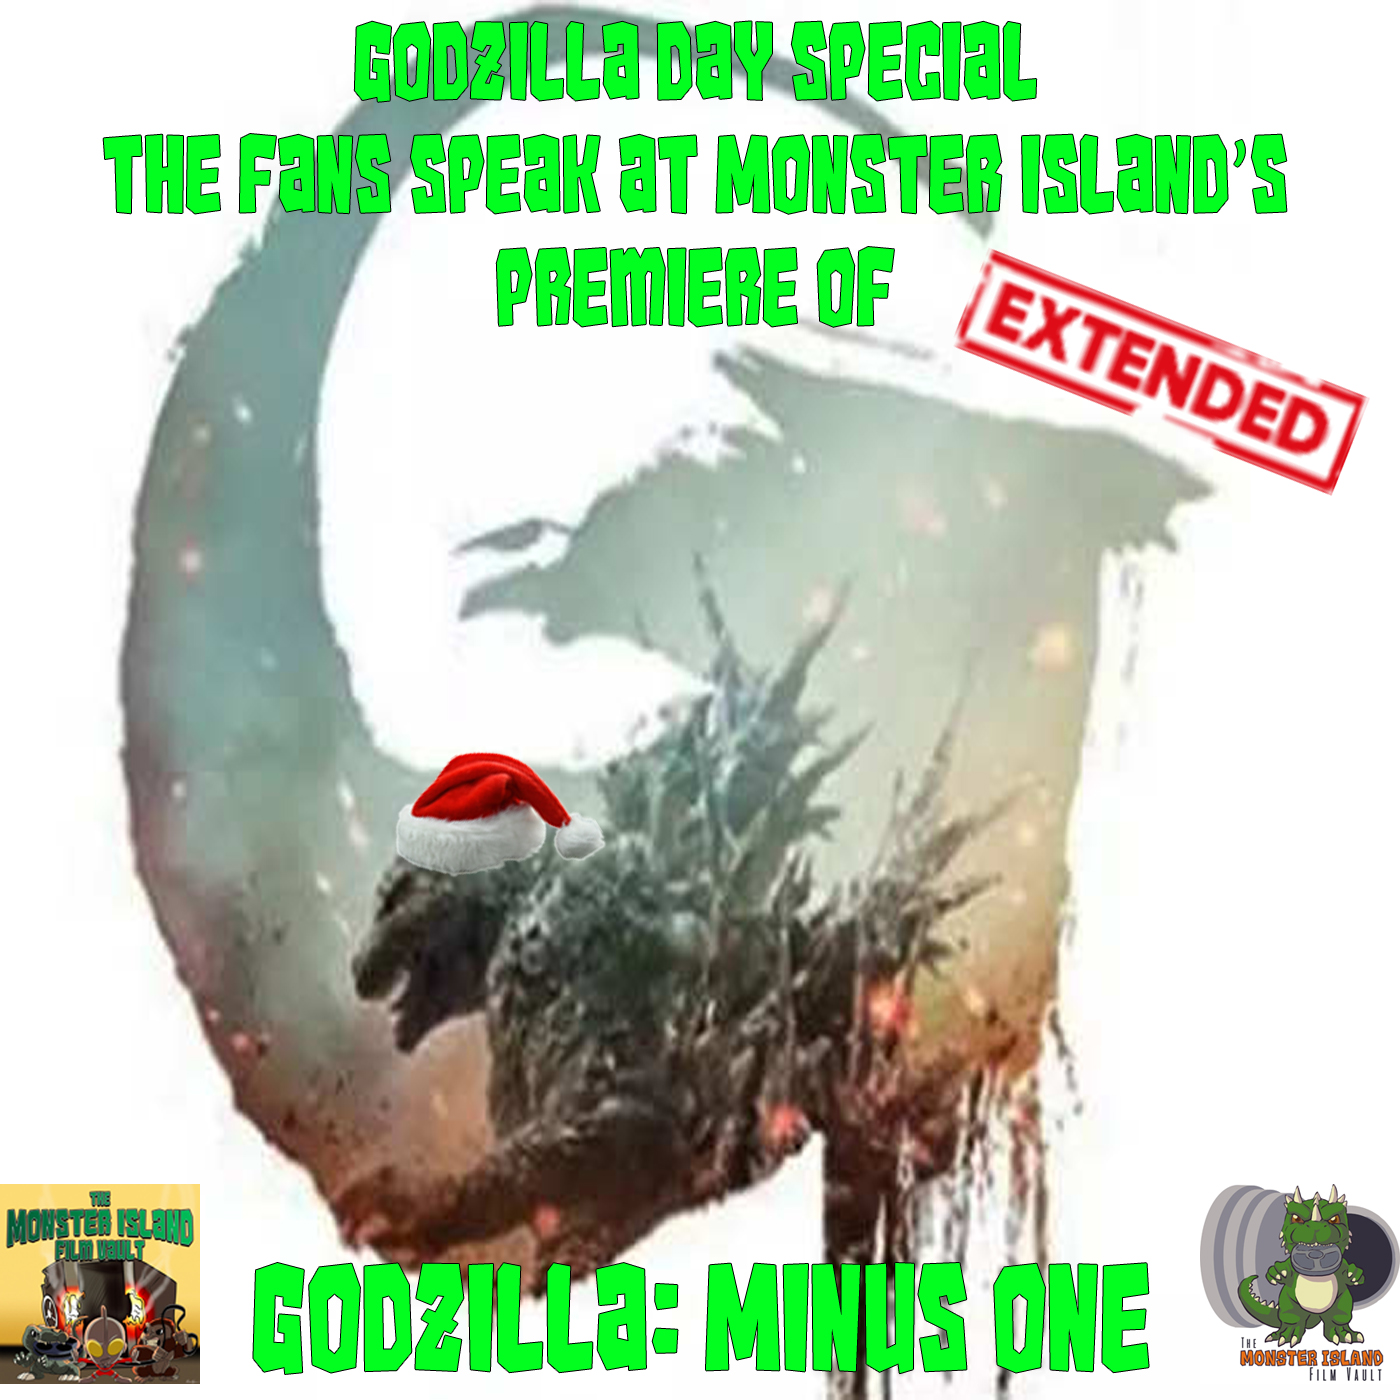 Godzilla Day Special: The Fans Speak at Monster Island’s Premiere of ‘Godzilla Minus One’ (EXTENDED EDITION)